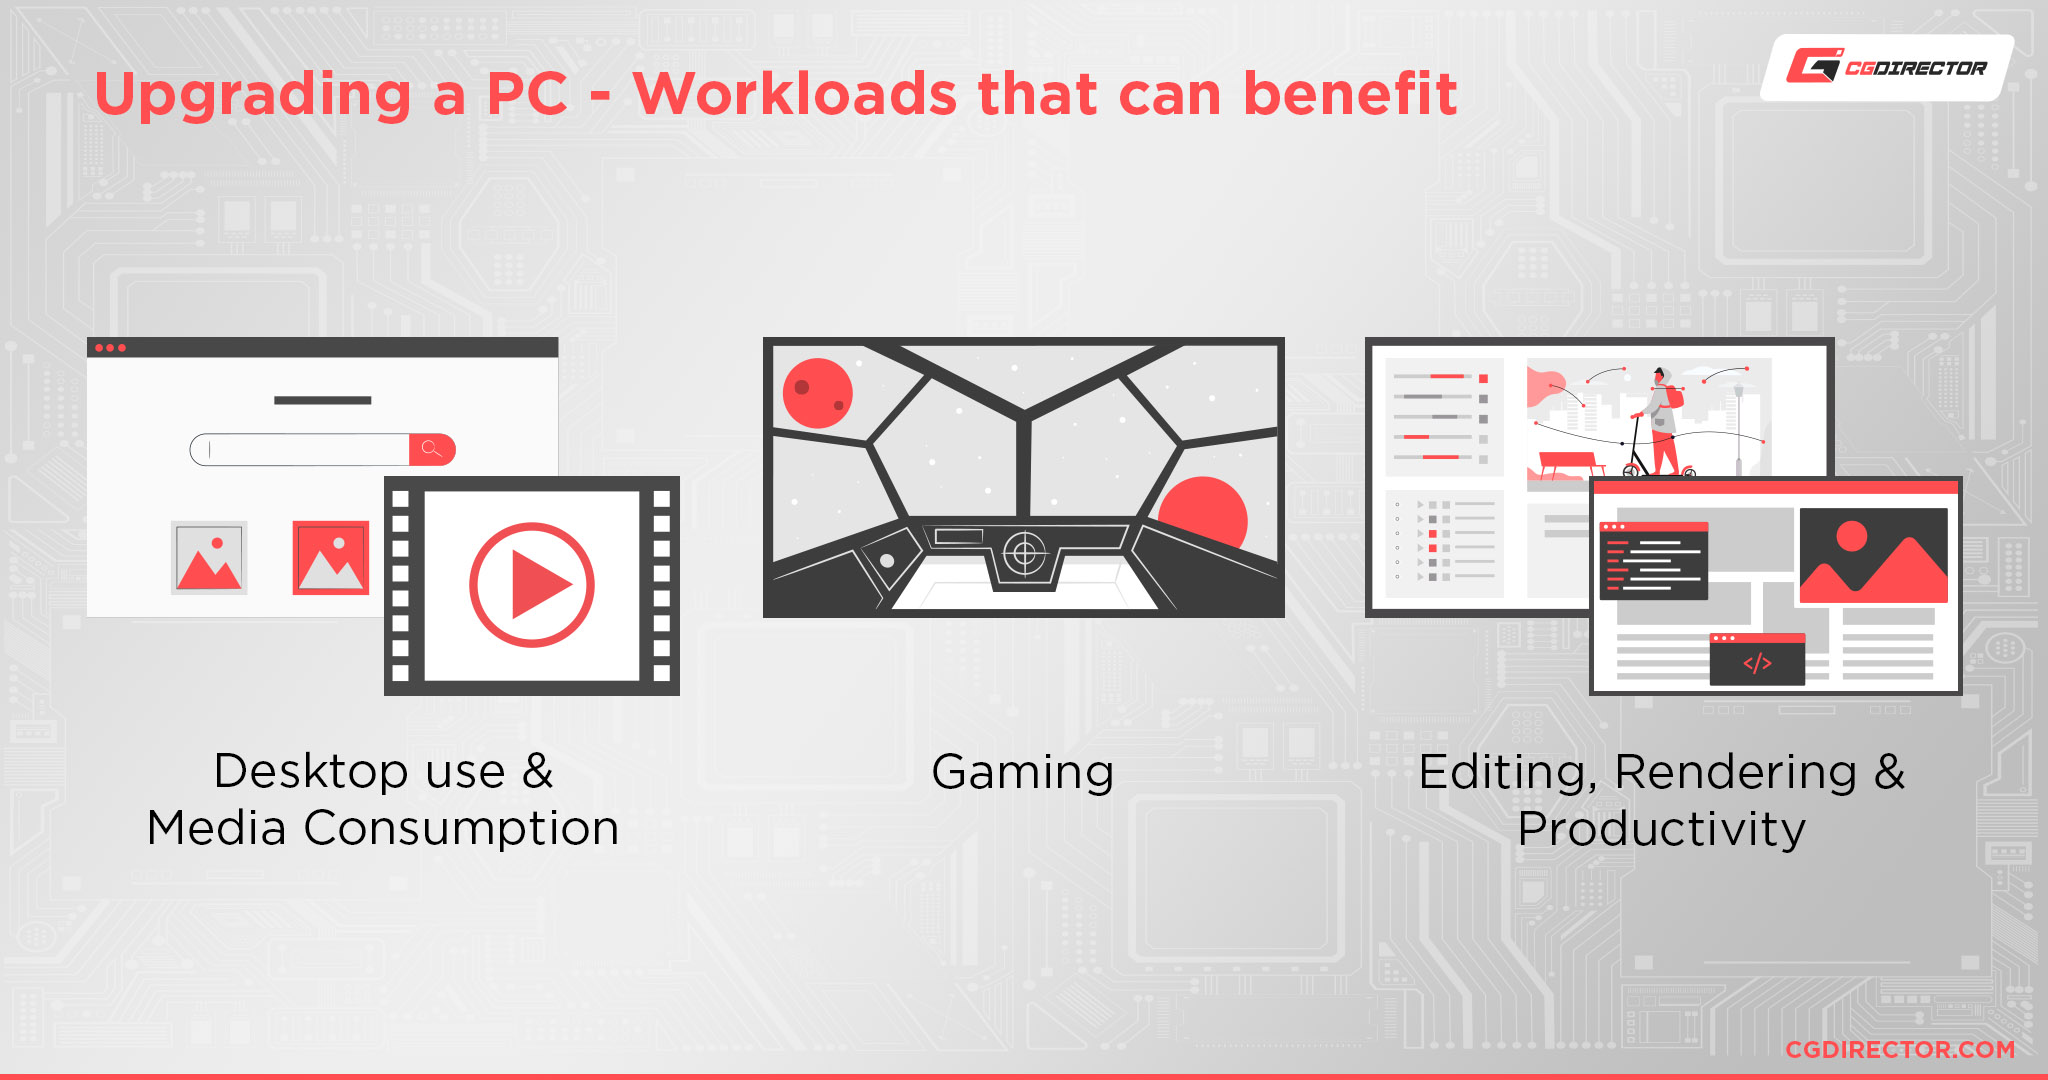 Upgrading a PC - Workloads that can benefit